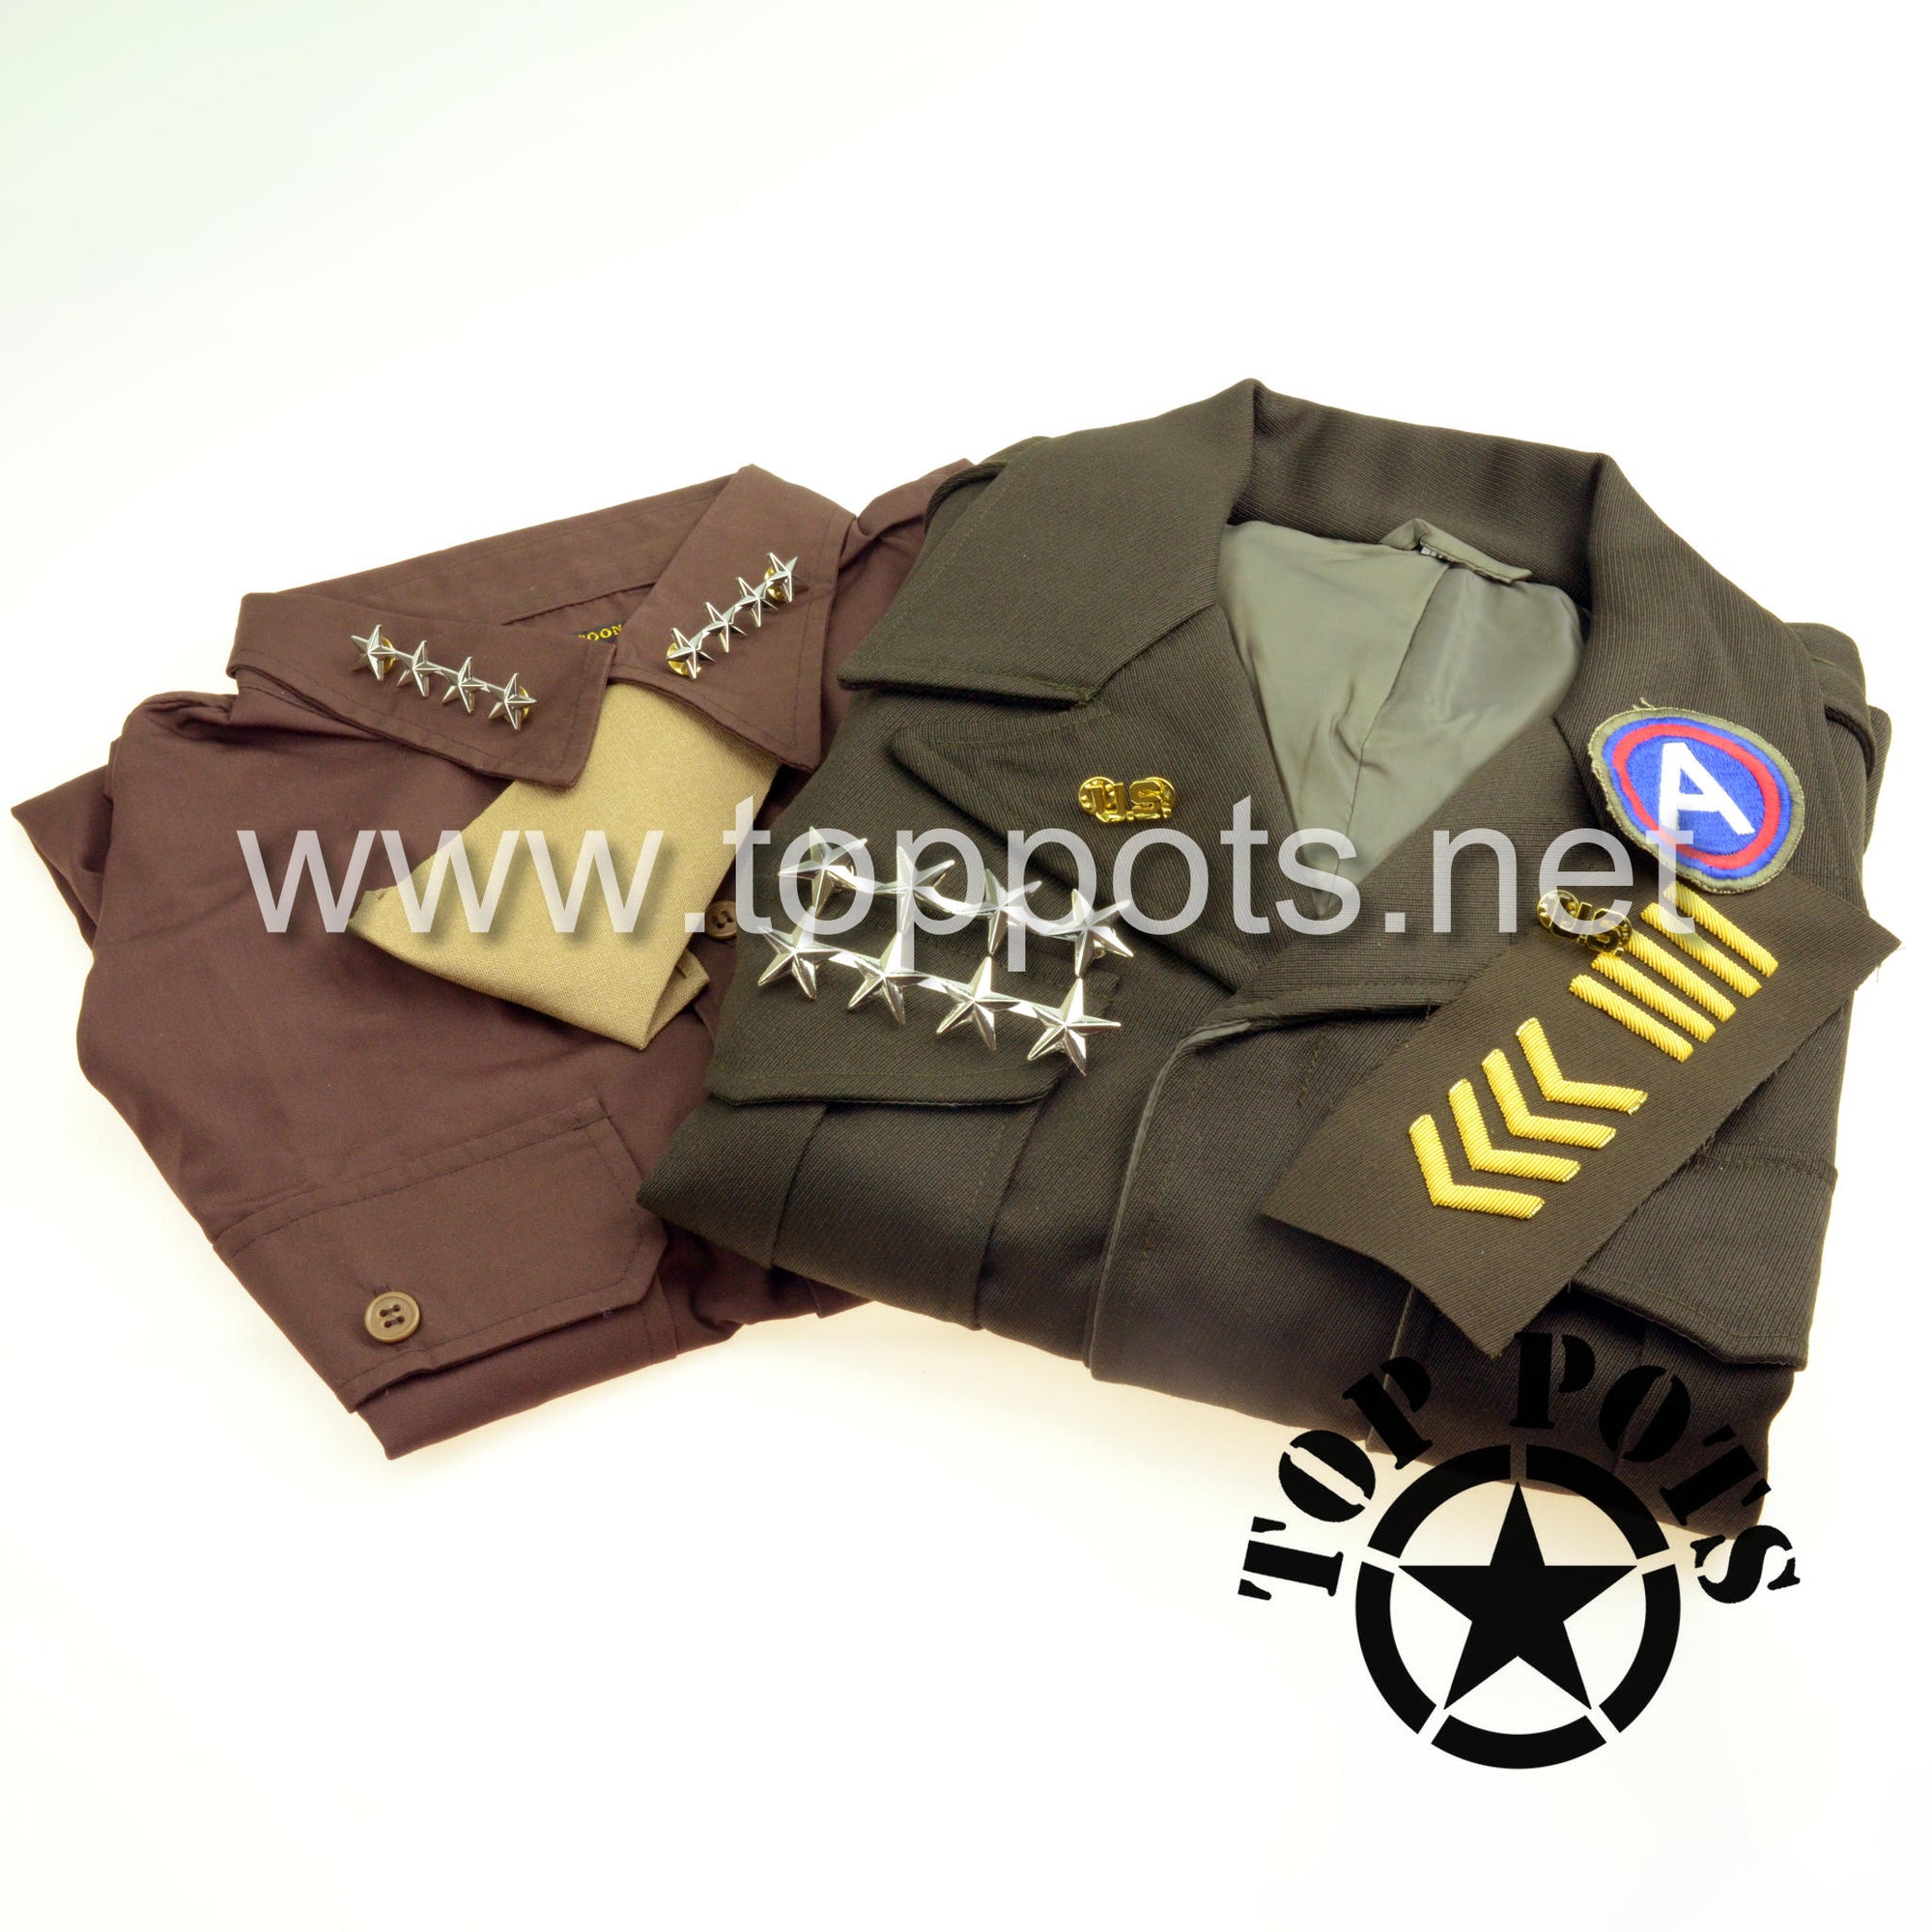 WWII US General Patton 3rd Army Four Star Parade Liner, Ike Jacket, Service Shirt, Khaki Tie, Riding Pant, Riding Boot & Uniform with Insignia (Full Uniform)